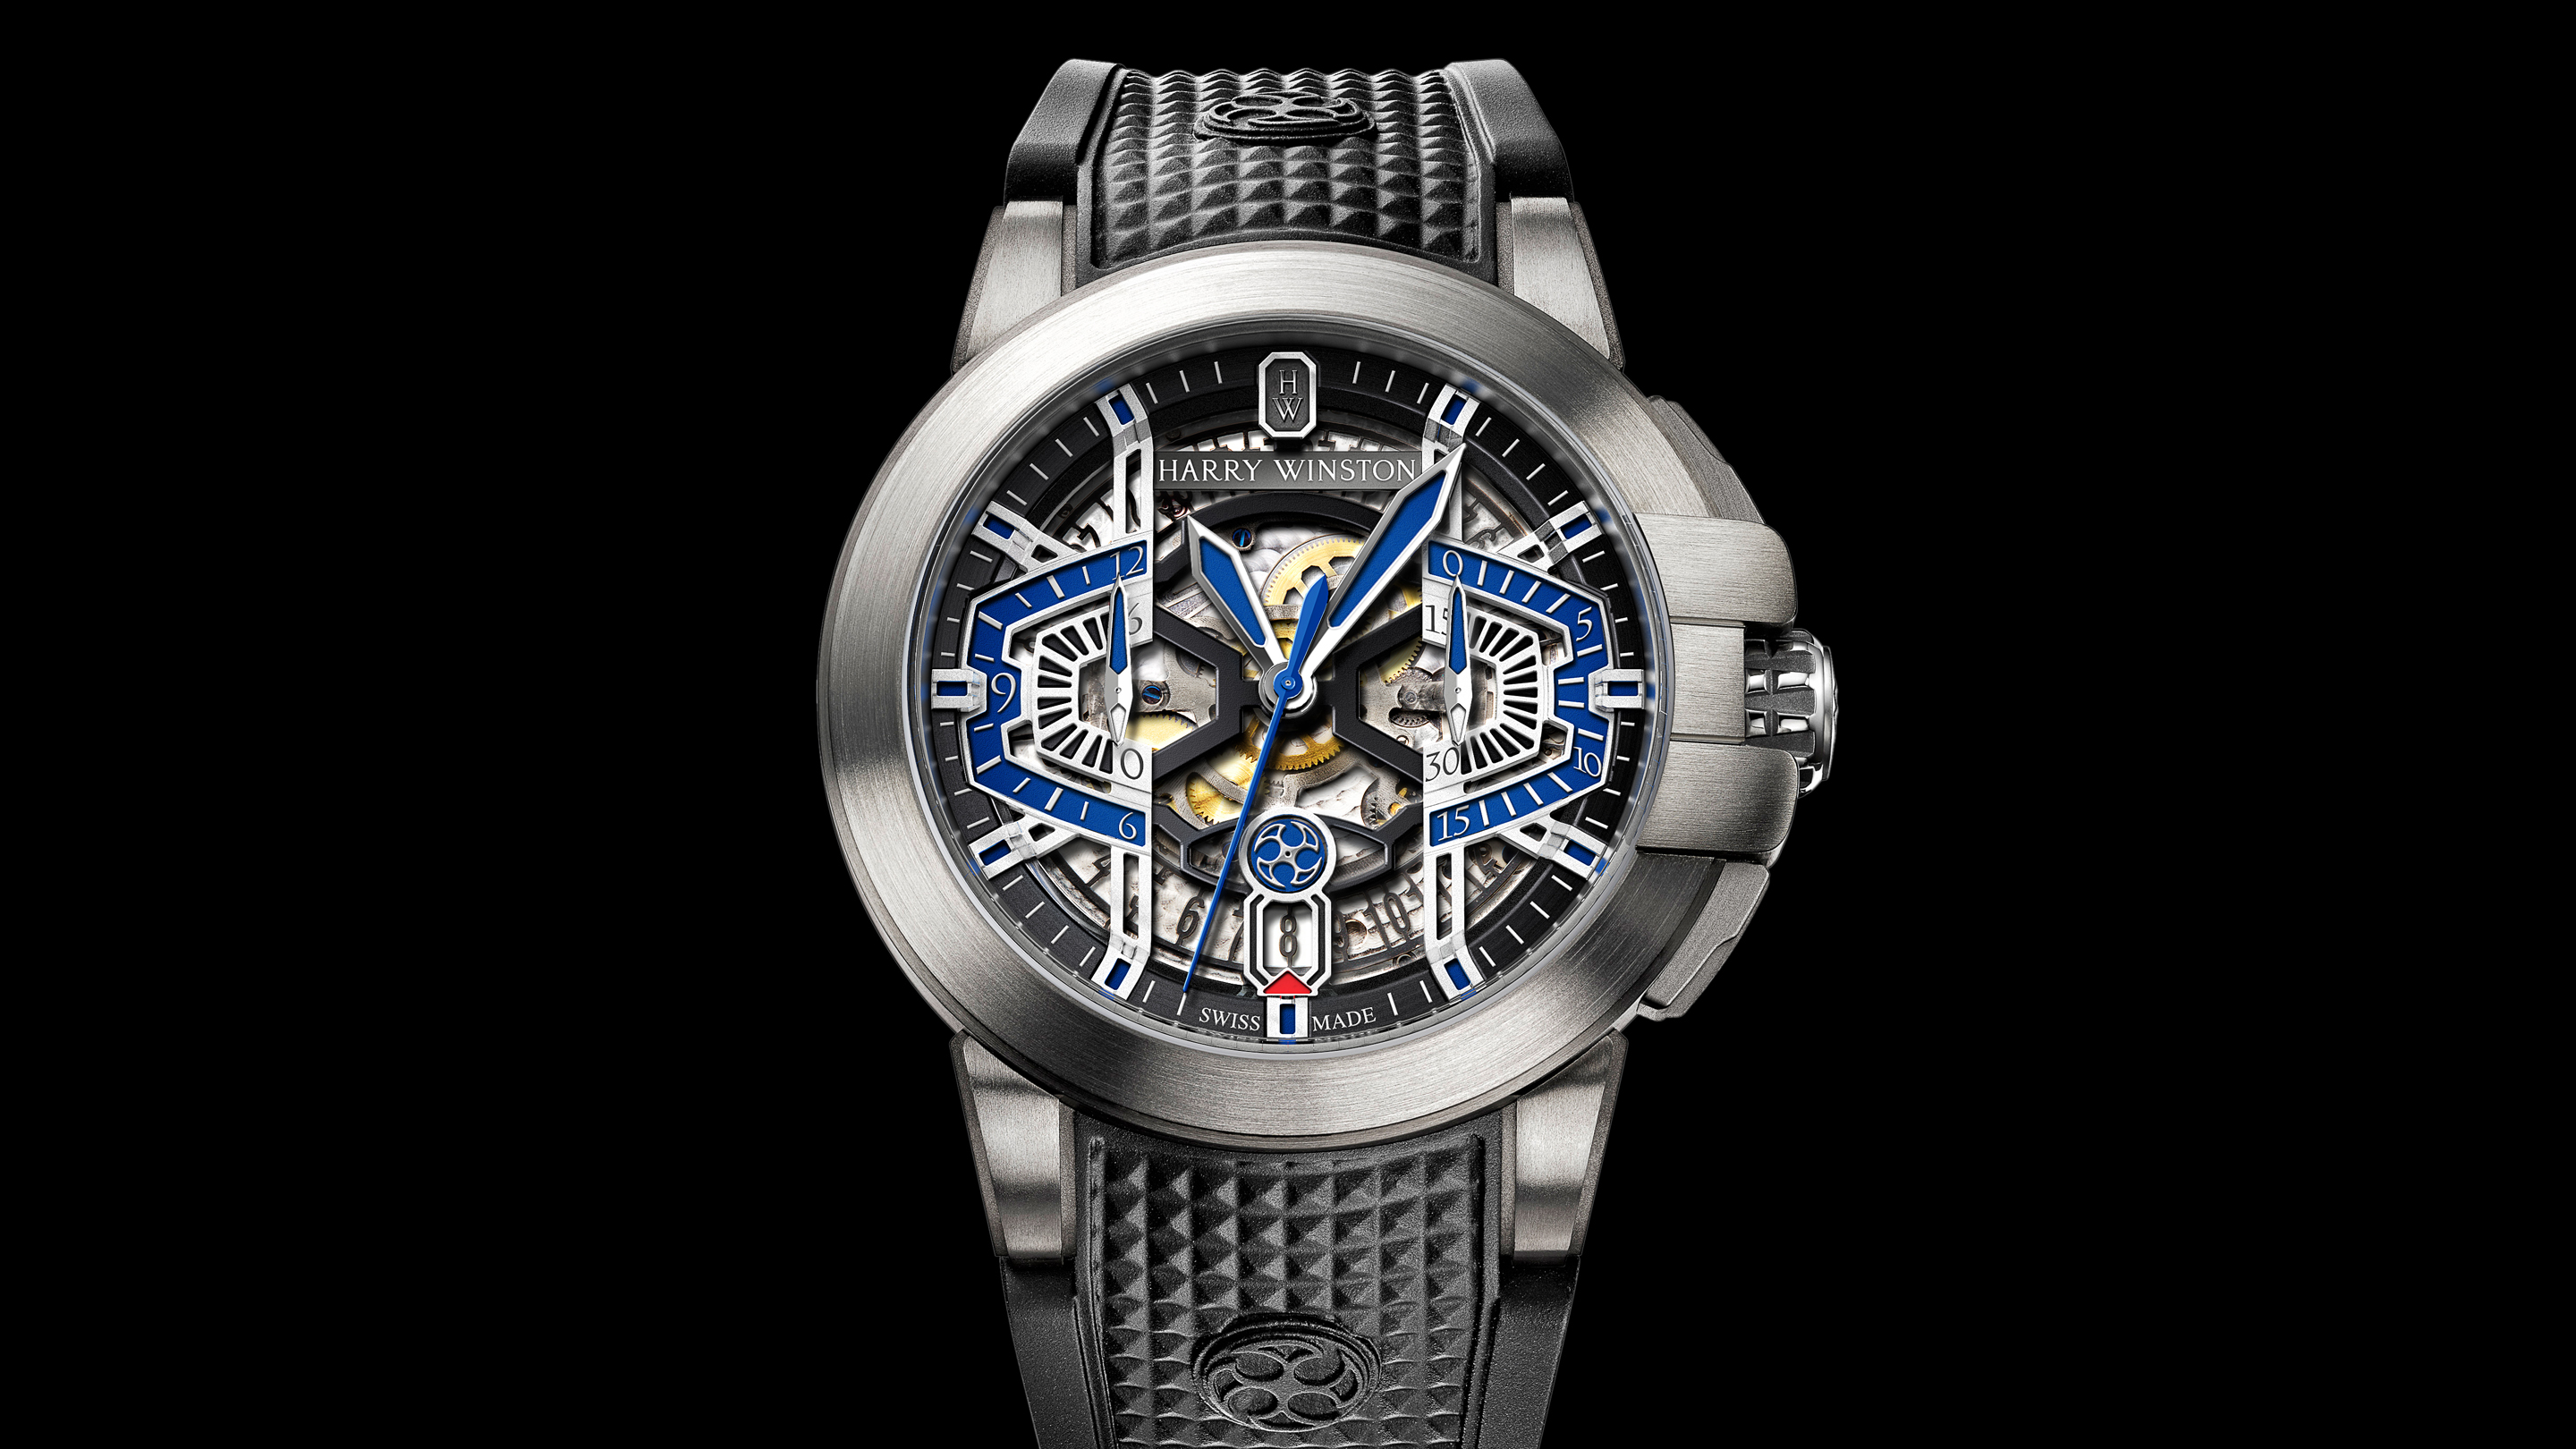 Introducing: The Harry Winston Project Z9, A Flyback Self-Winding 